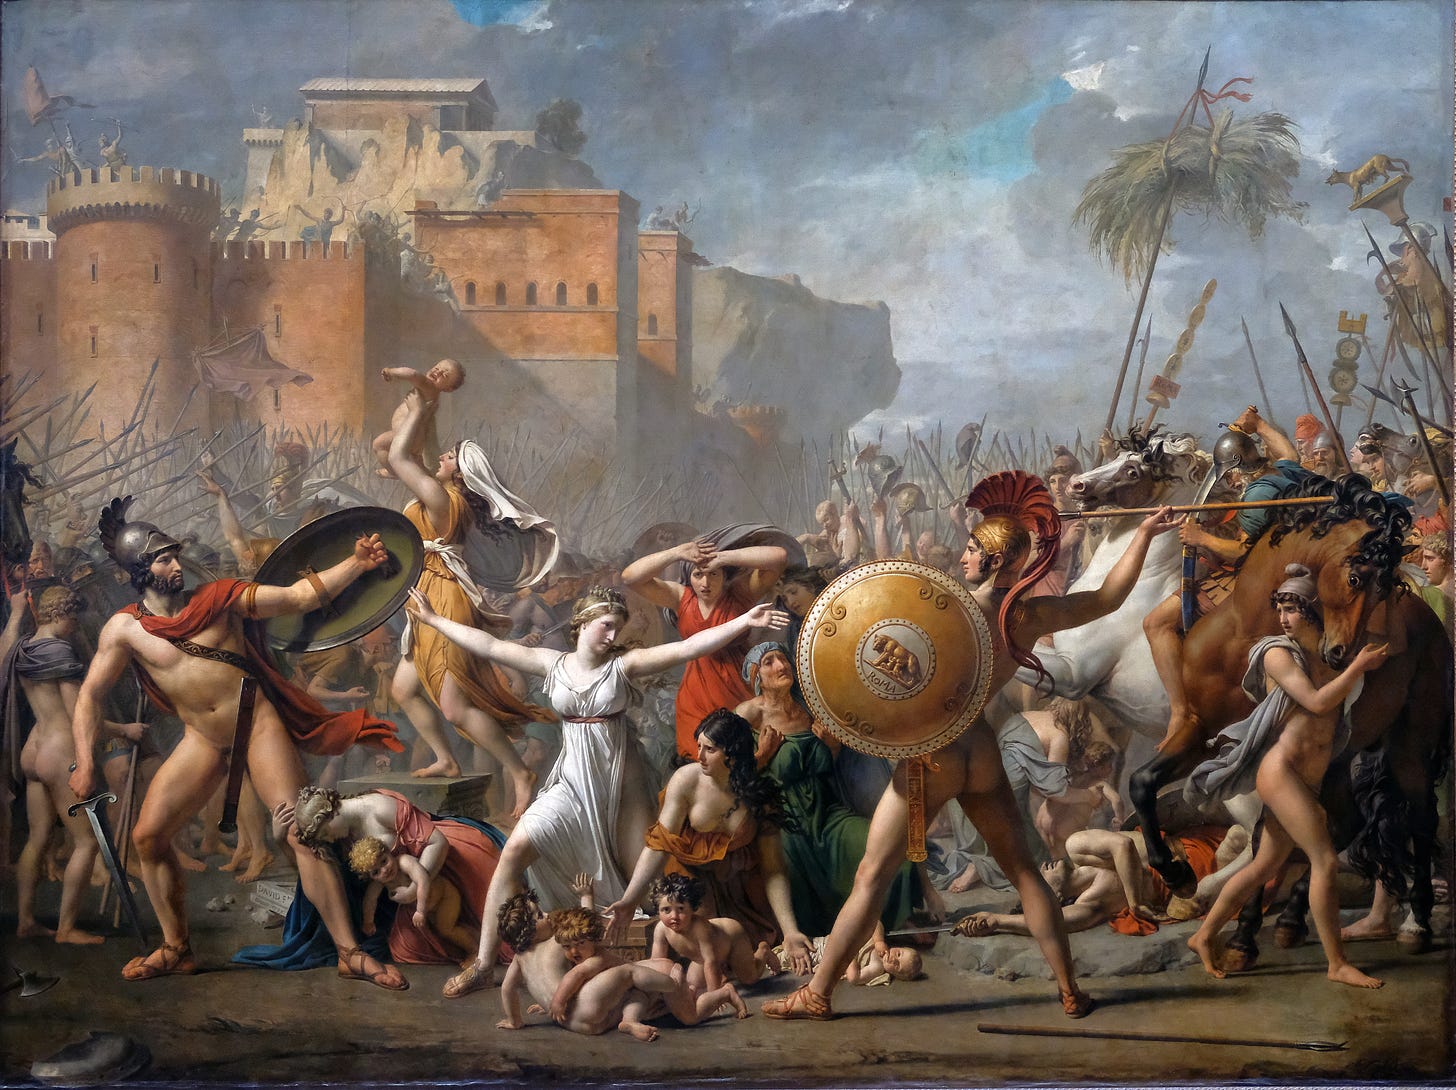 A large scale history portrait in the academic style. A woman is the central figure, stopping fighting on either side of her. This painting depicts the Sabine women ending the fighting between the Sabines and the Romans, the event leading the union of the two cultures.